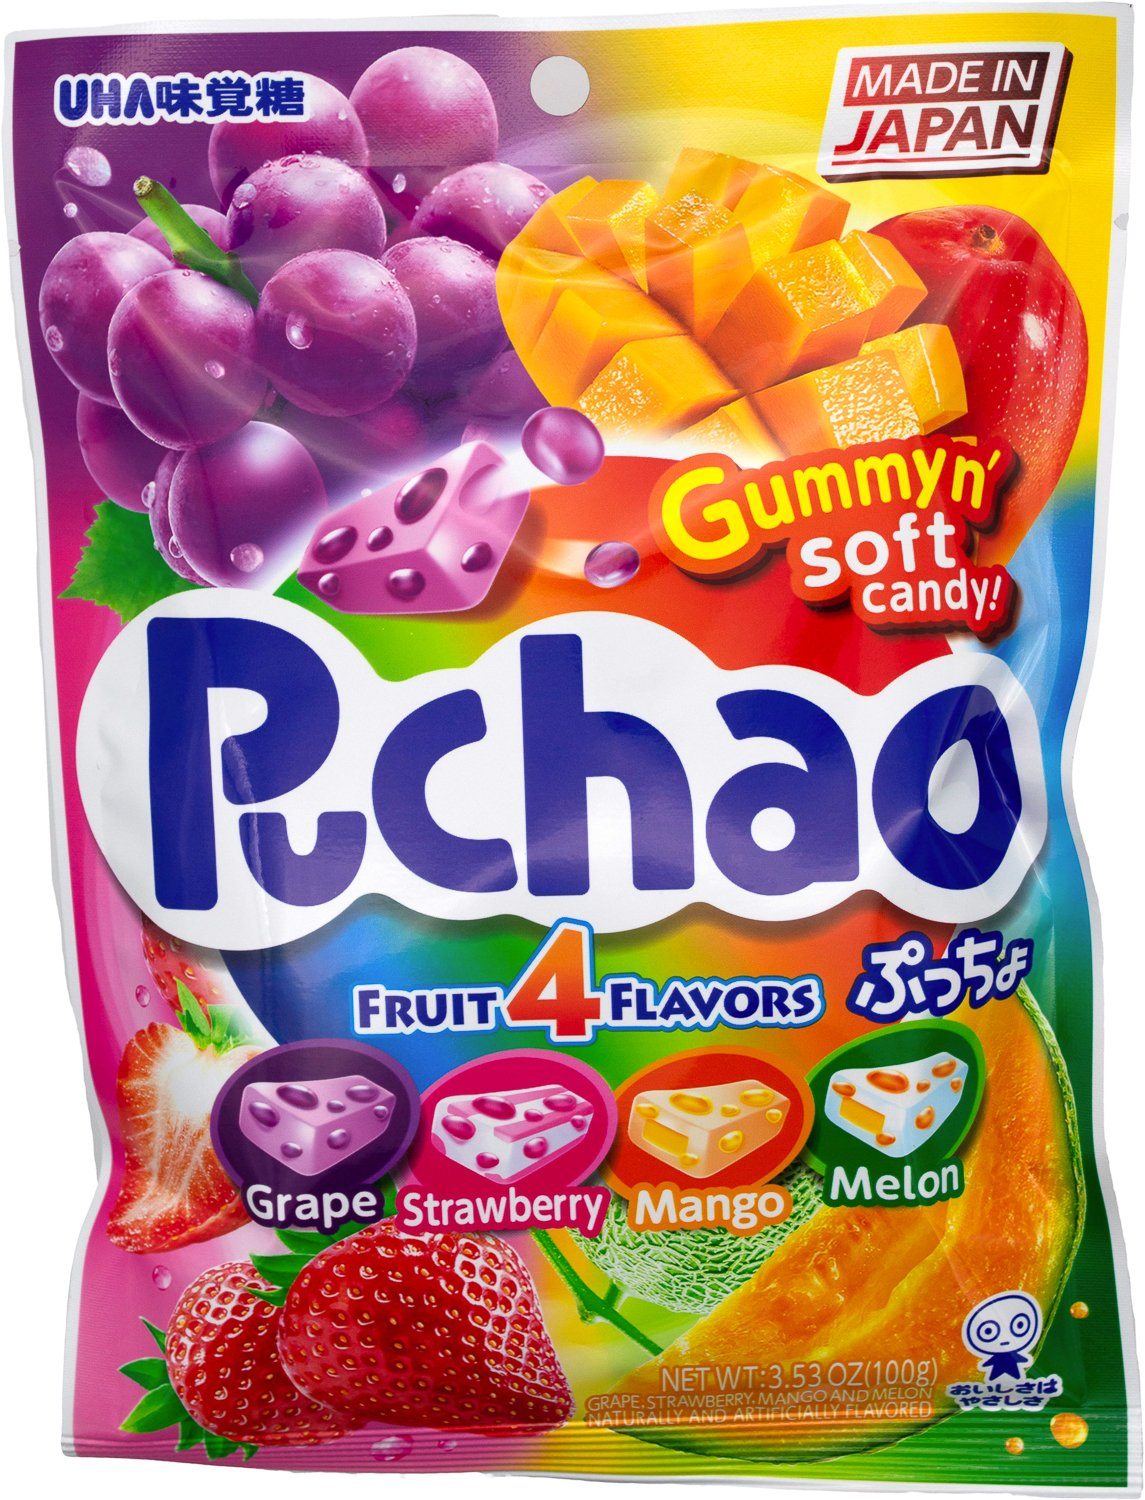 Puchao Gummy n' Soft Candy Puchao Fruit 4 Flavors 3.53 Ounce 